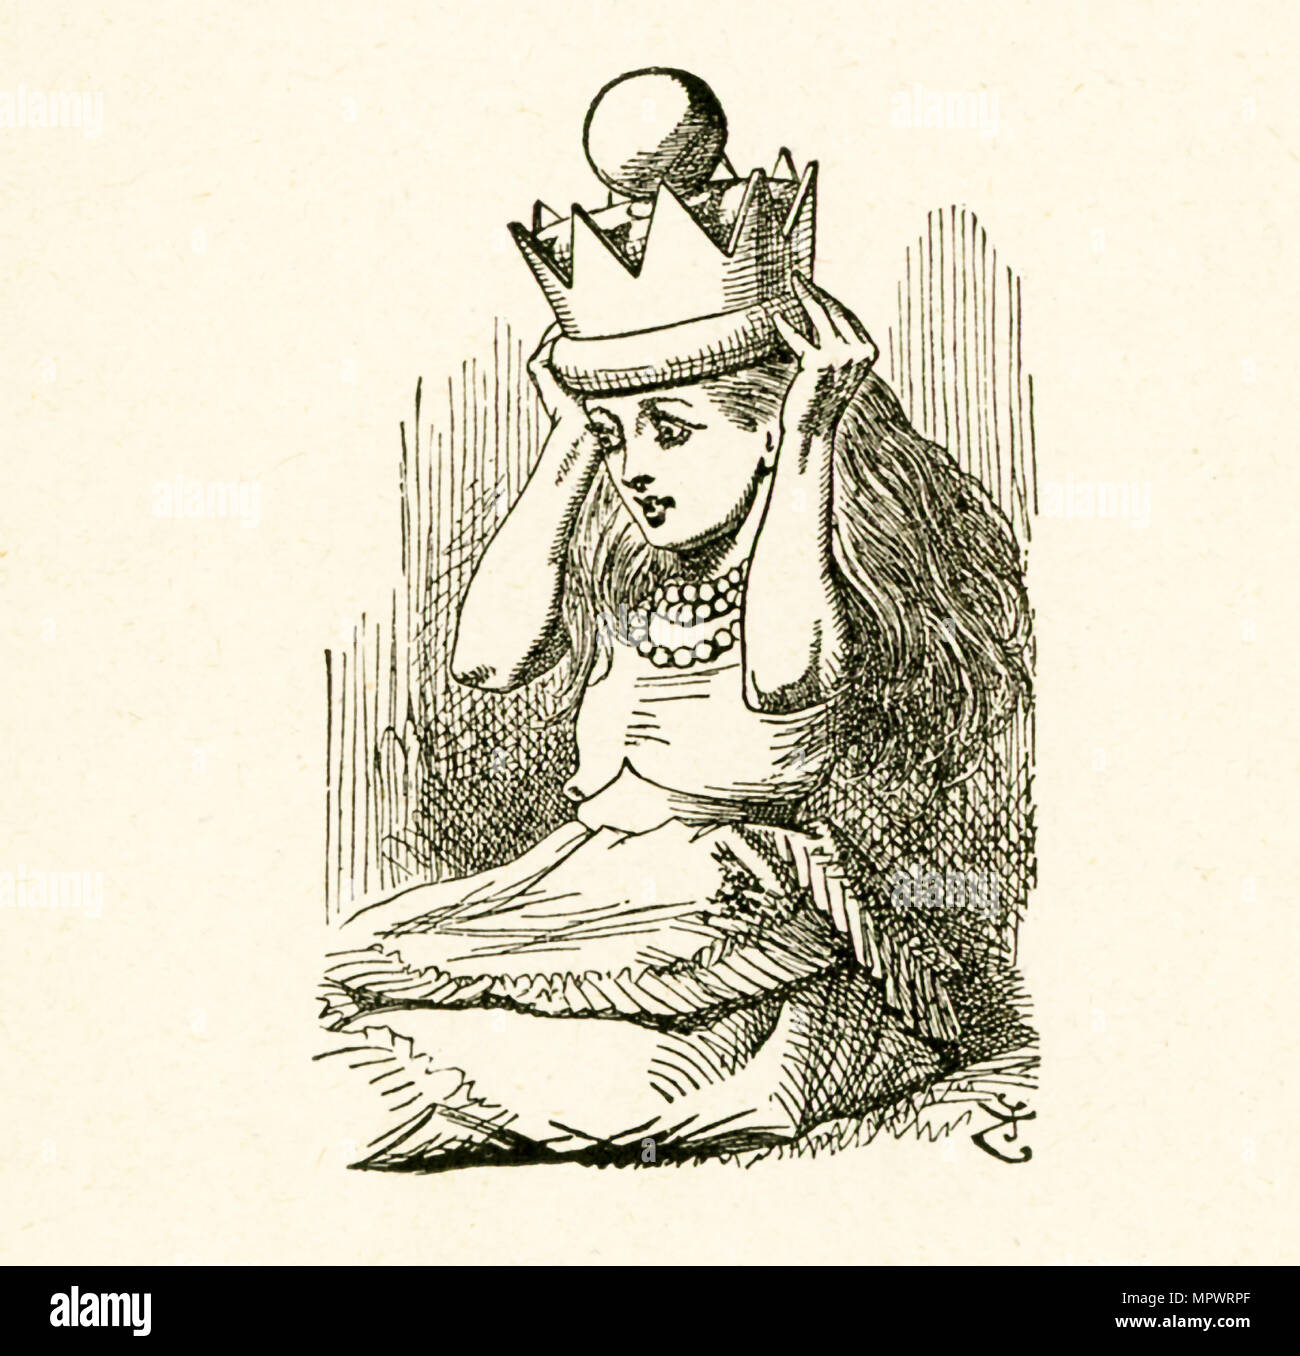 This illustration of Alice putting on the royal crown is from 'Through the Looking-Glass and What Alice Found There' by Lewis Carroll (Charles Lutwidge Dodgson), who wrote this novel in 1871 as a sequel to 'Alice's Adventures in Wonderland.' Stock Photo